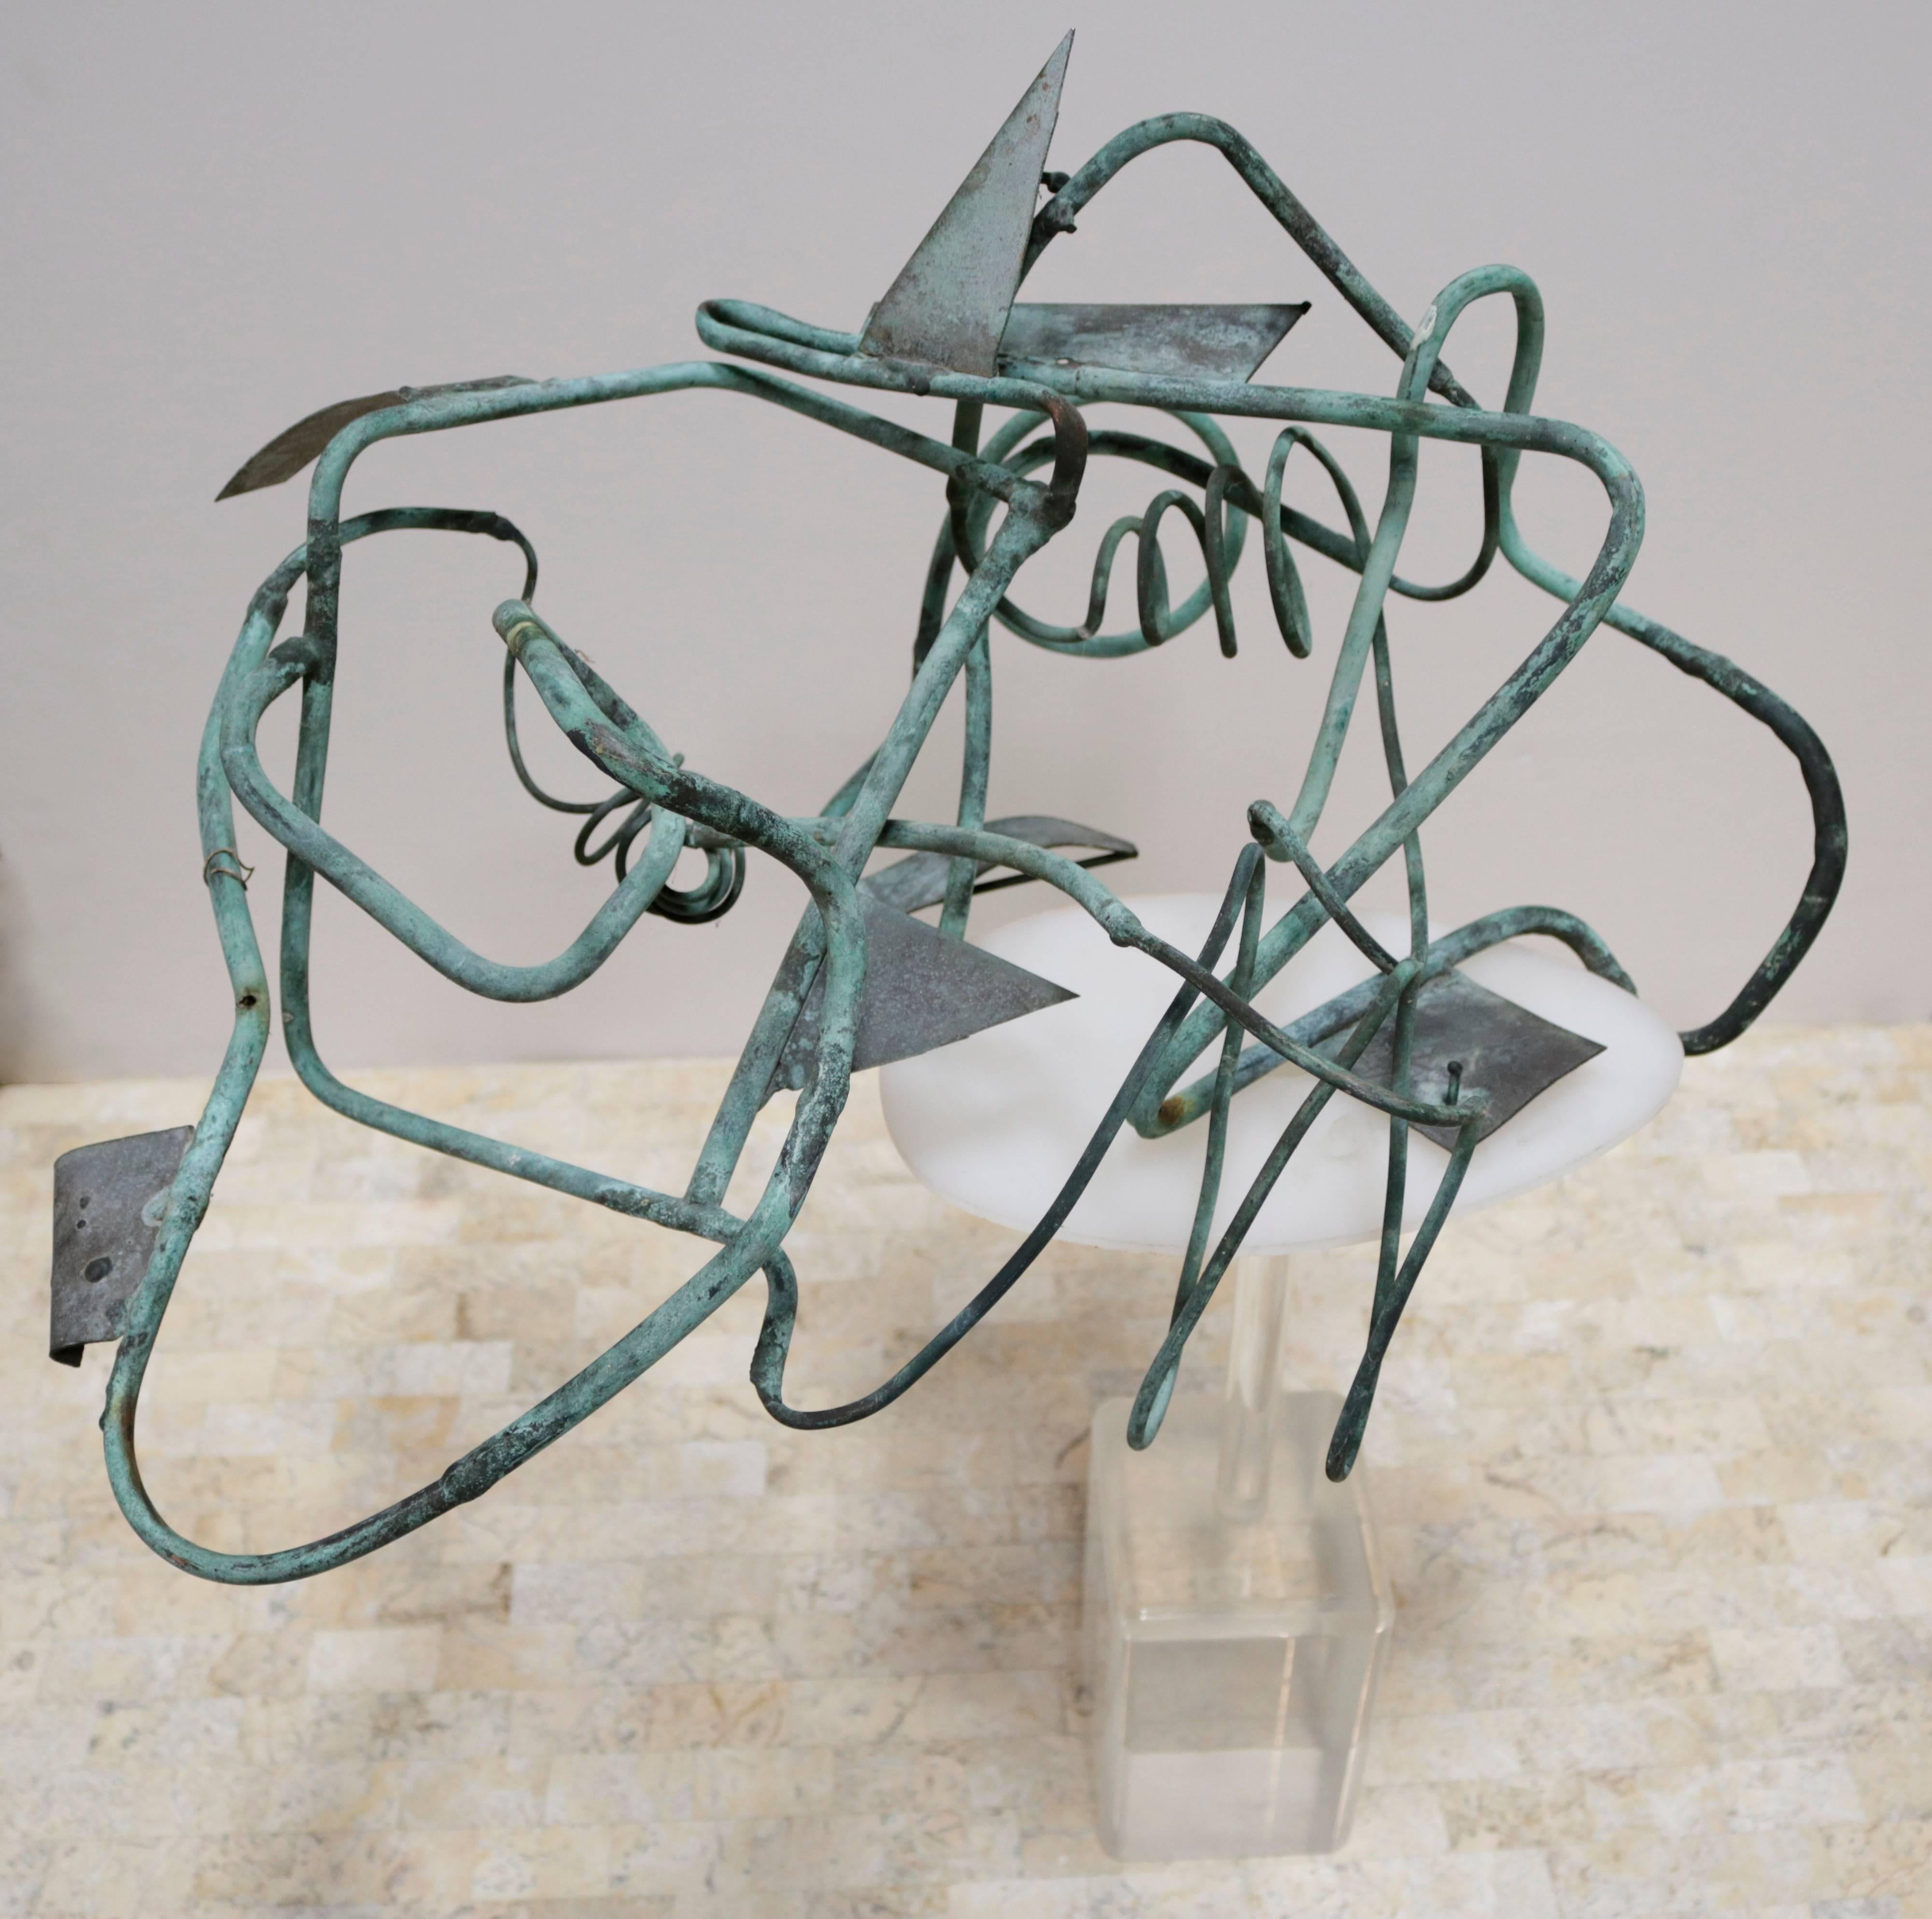 Abstract patinated bronze sculpture on a Lucite base. Sculpture attaches to base by way of one small piece of the bronze which acts as a kind of hook to latch onto the Lucite. Unknown artist.